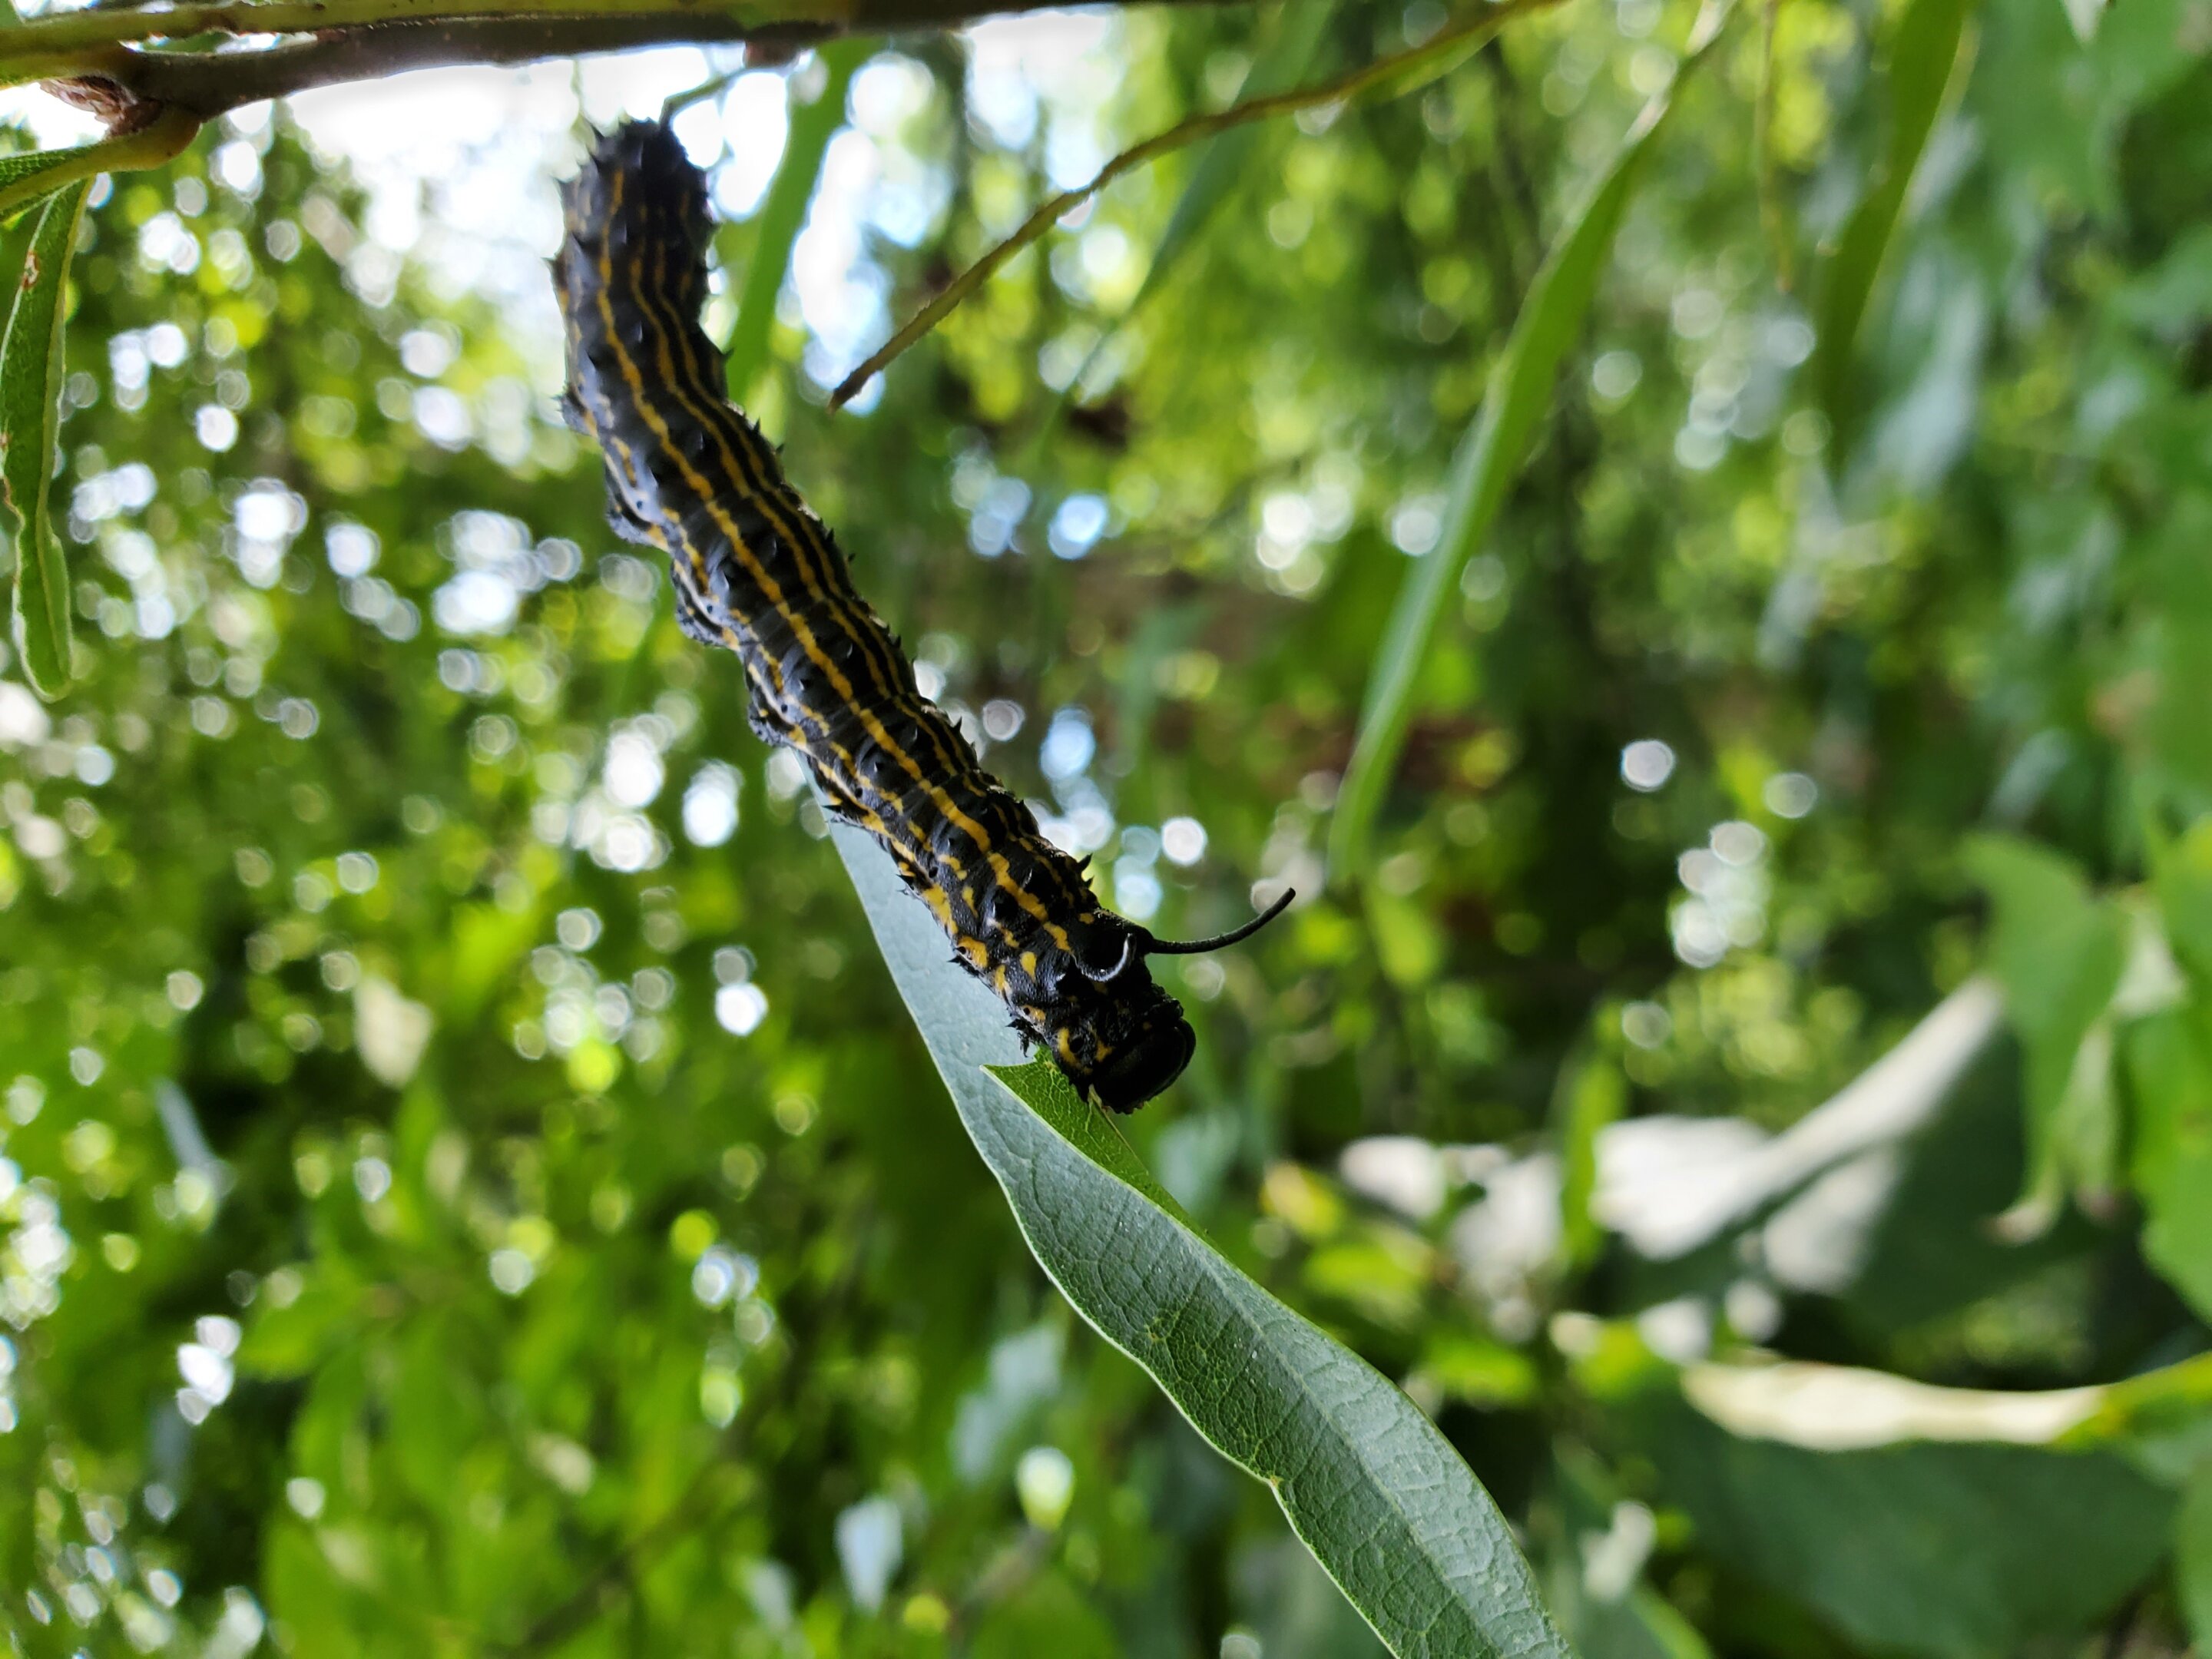 #Scientists discover how caterpillars can stop their bleeding in seconds